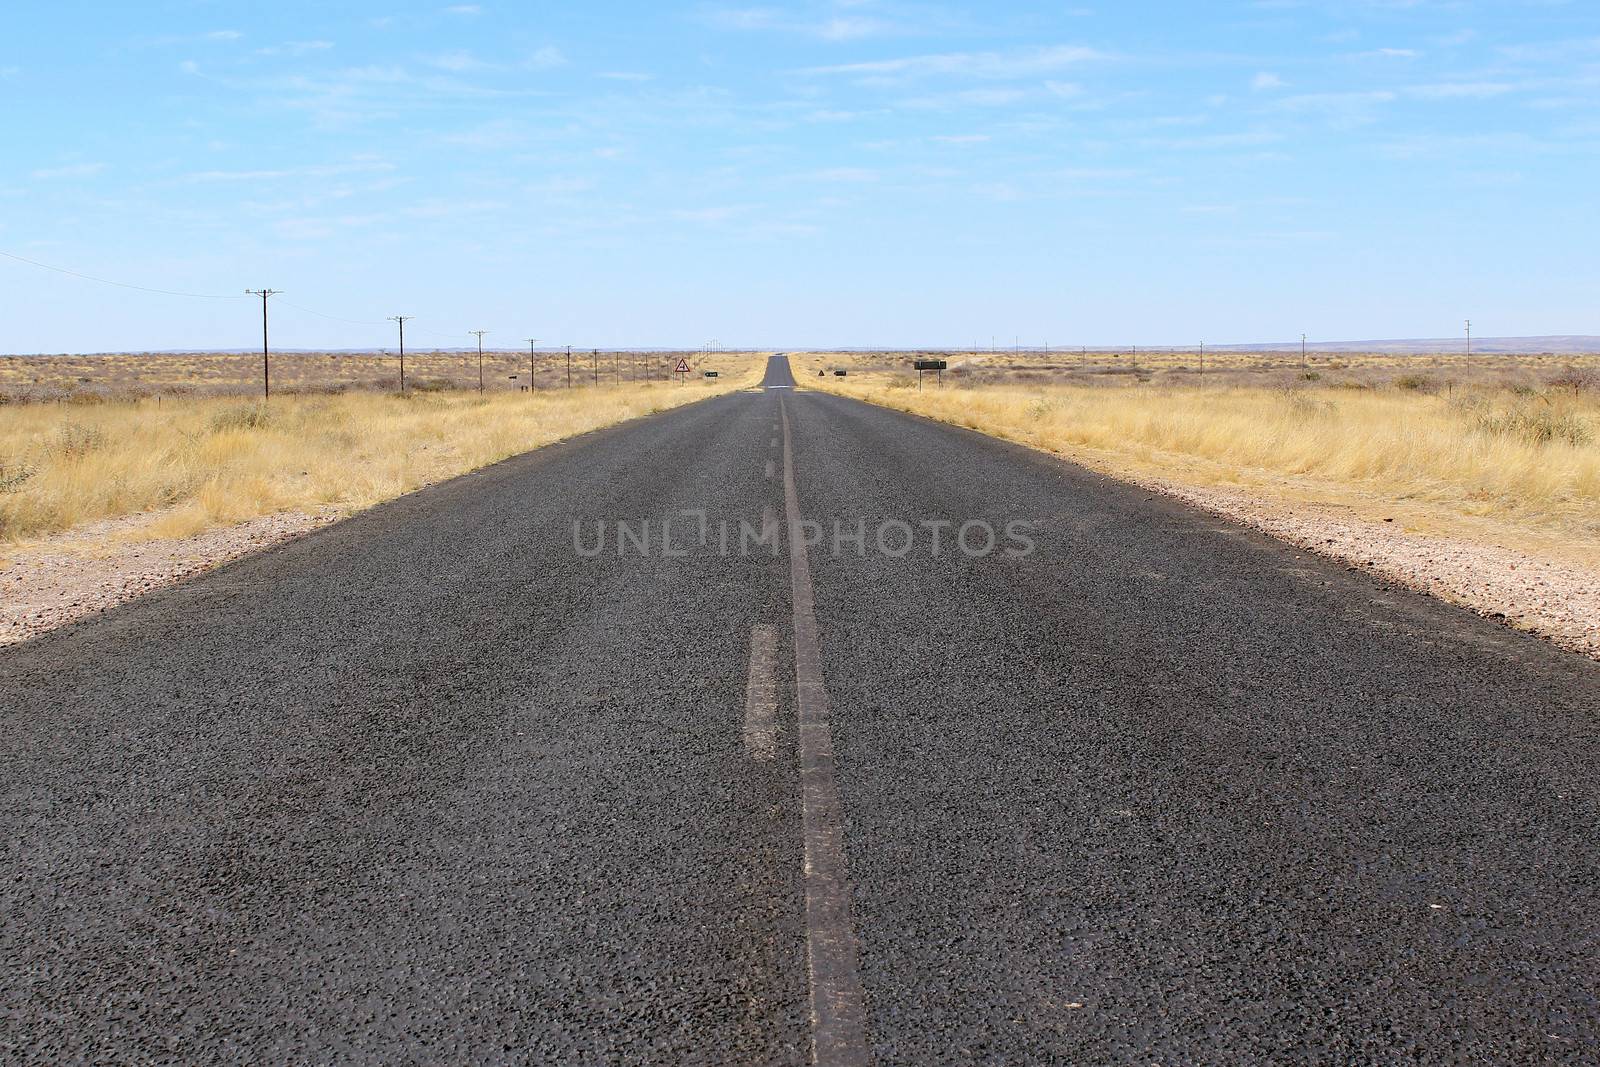 B1 road in Namibia heading toward Sesriem and Sossusvlei by ptxgarfield